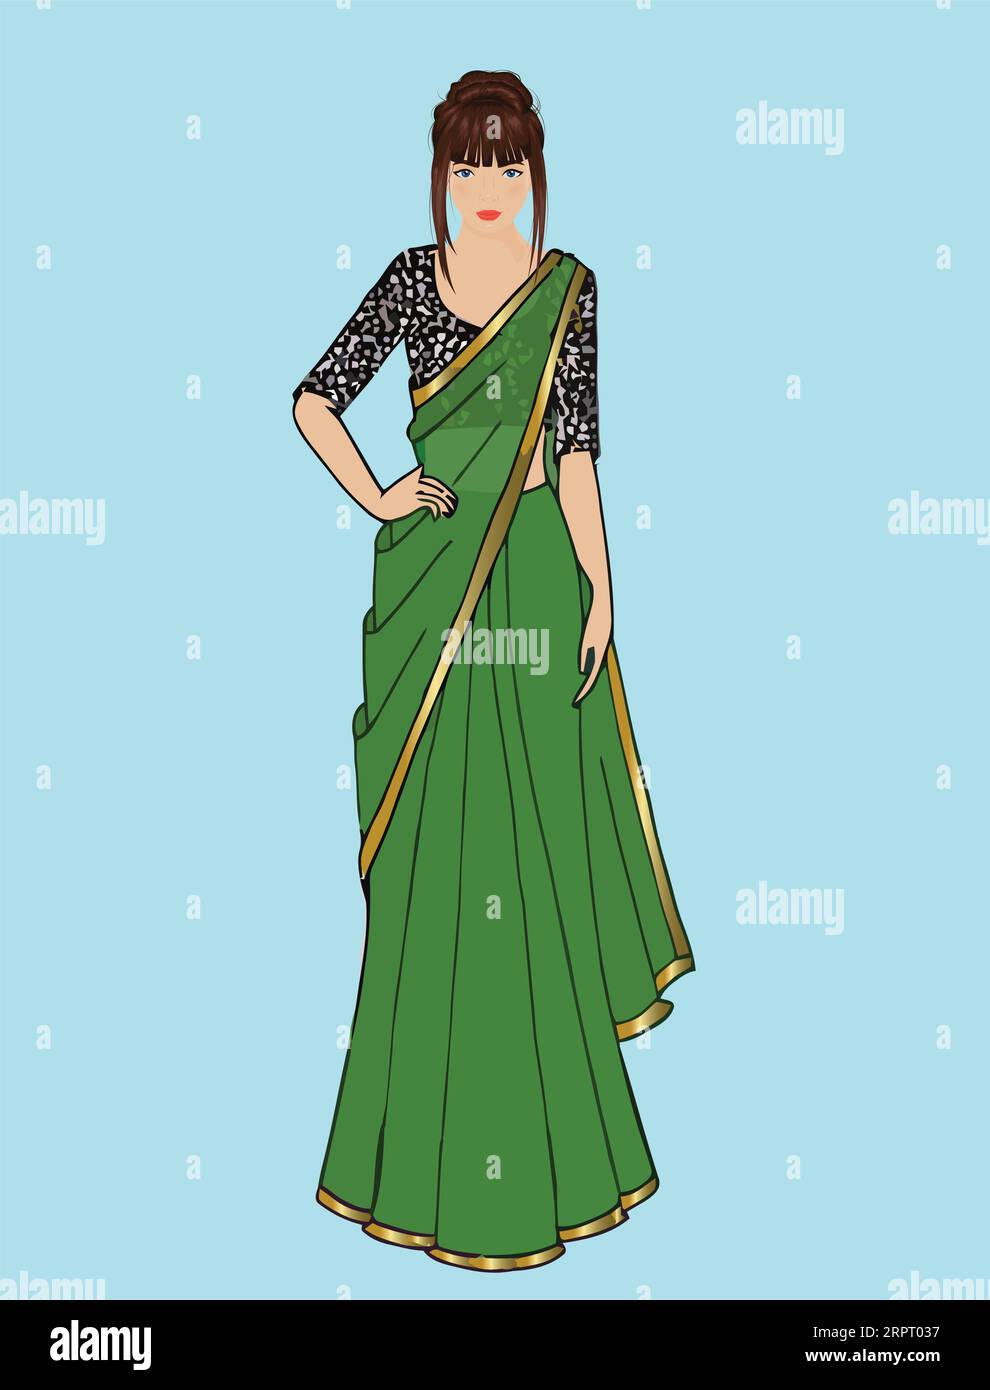 Indian girl wearing traditional Indian Dress green sari and a black blouse Stock Vector